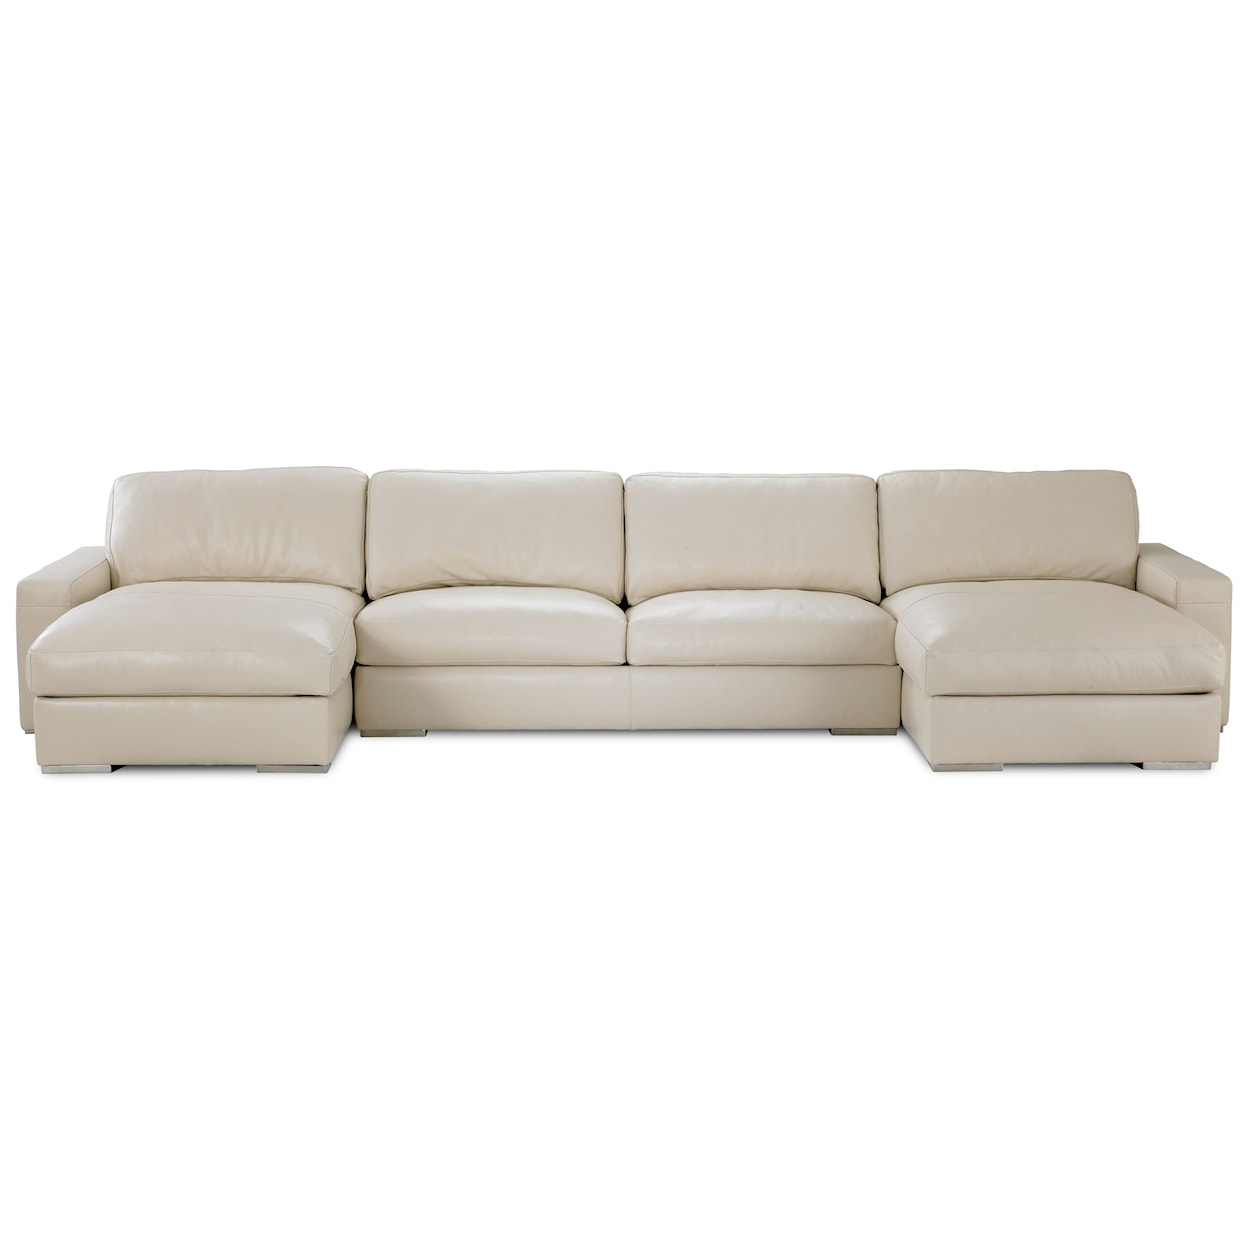 American Leather Westchester 3-Piece Sectional Sofa